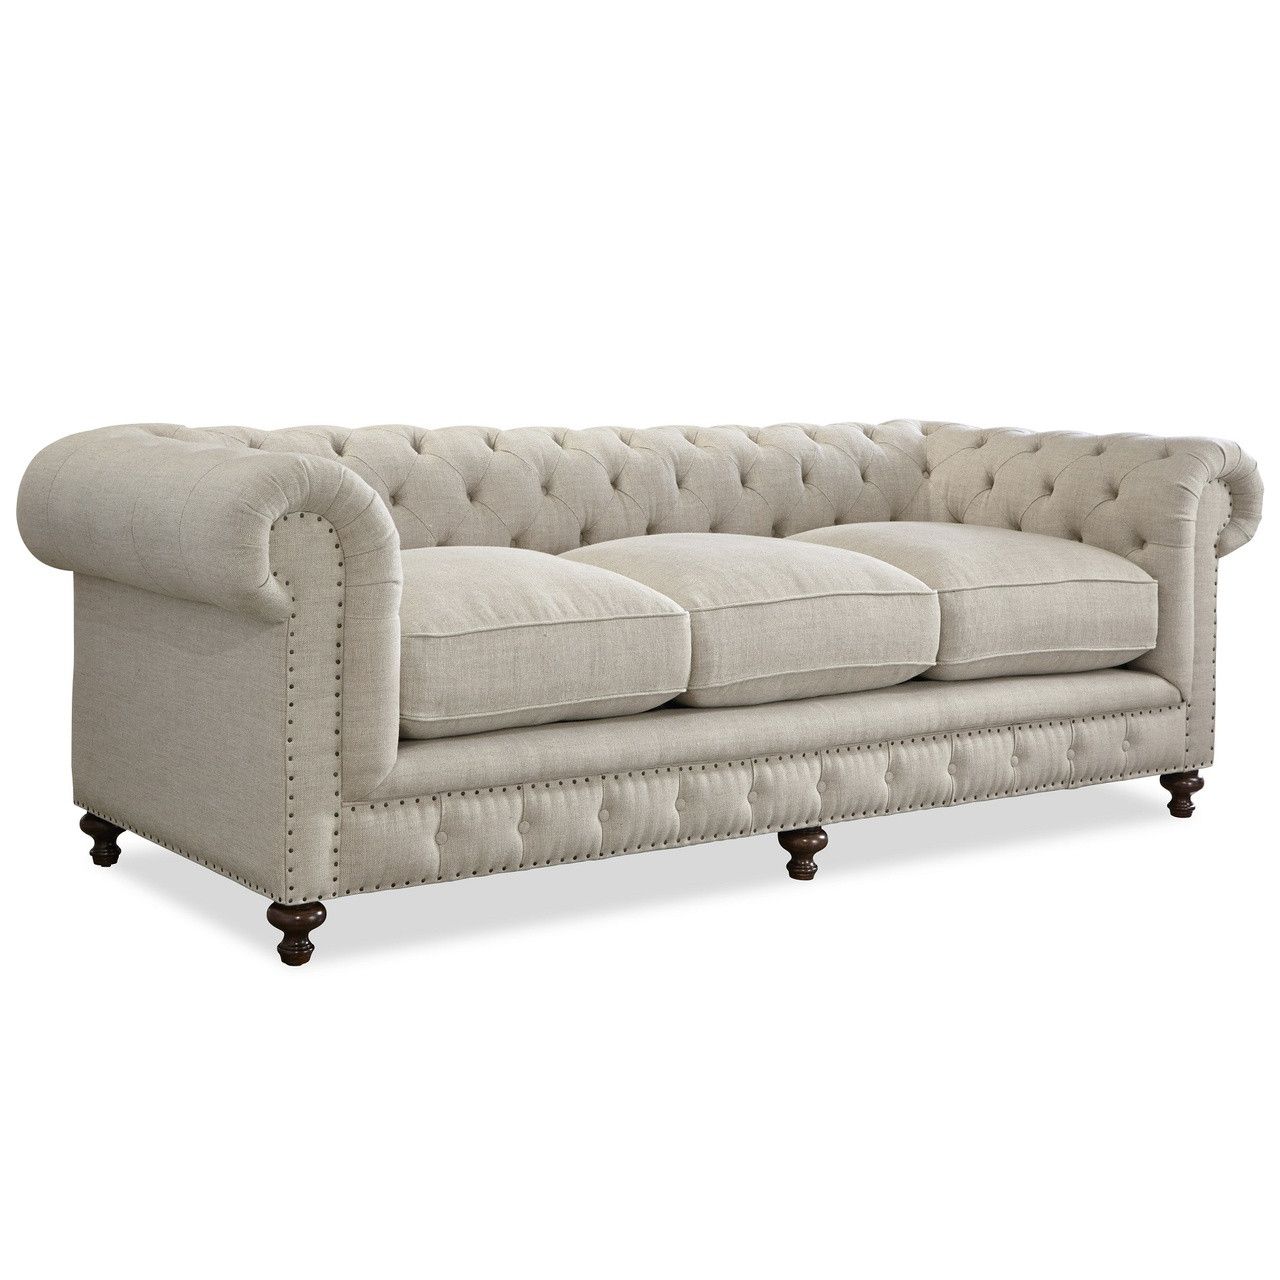 Featured Photo of 15 Ideas of Tufted Upholstered Sofas